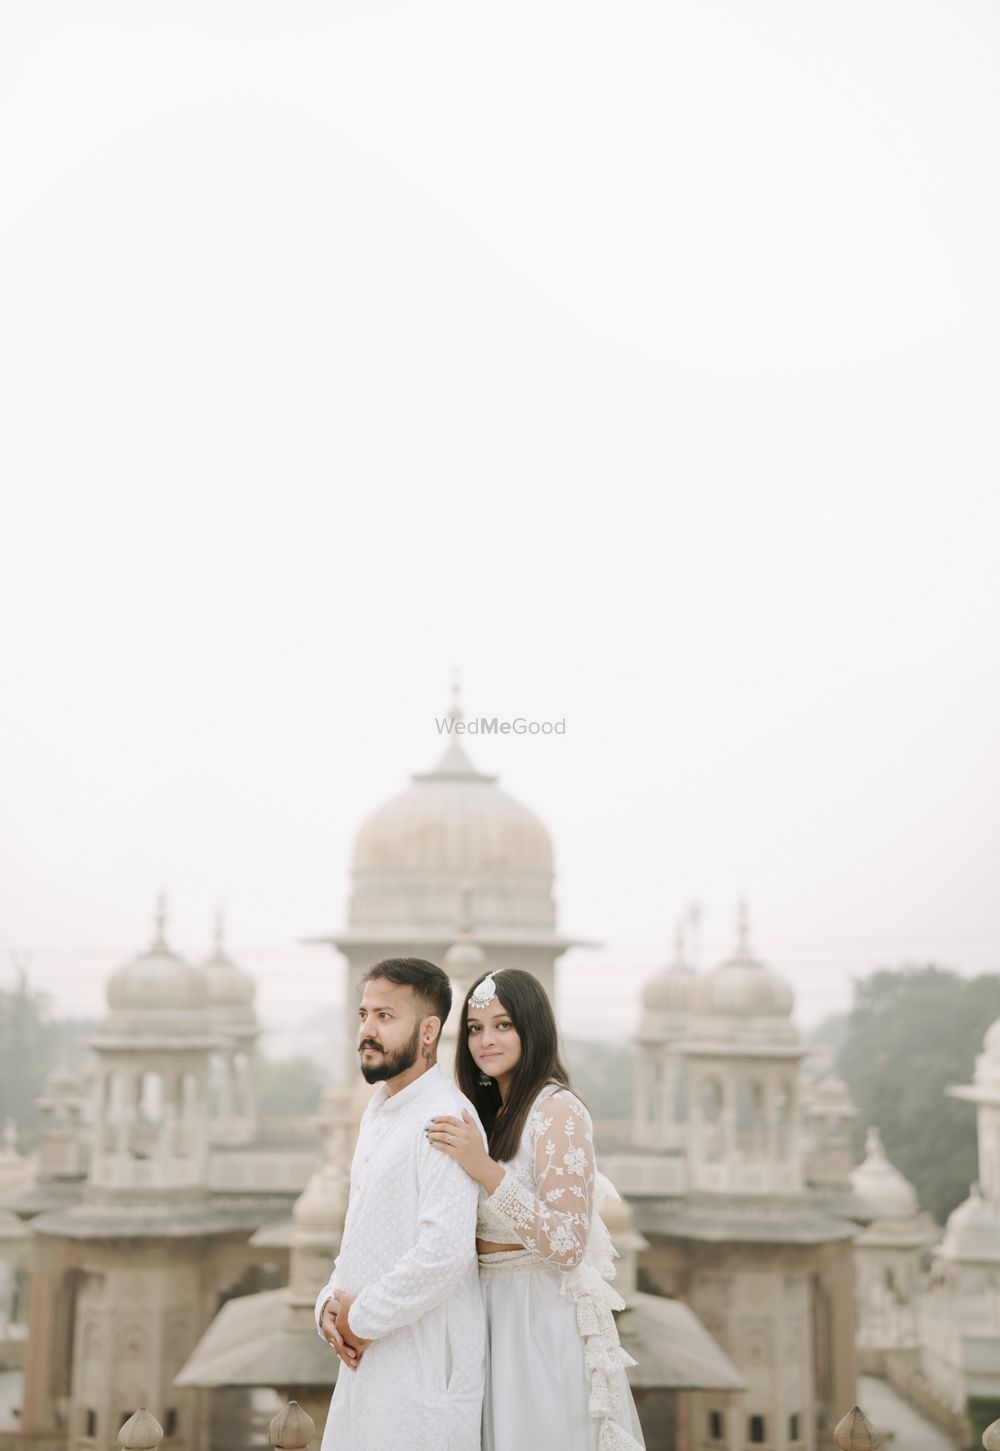 Photo By The Focus Production - Pre Wedding Photographers